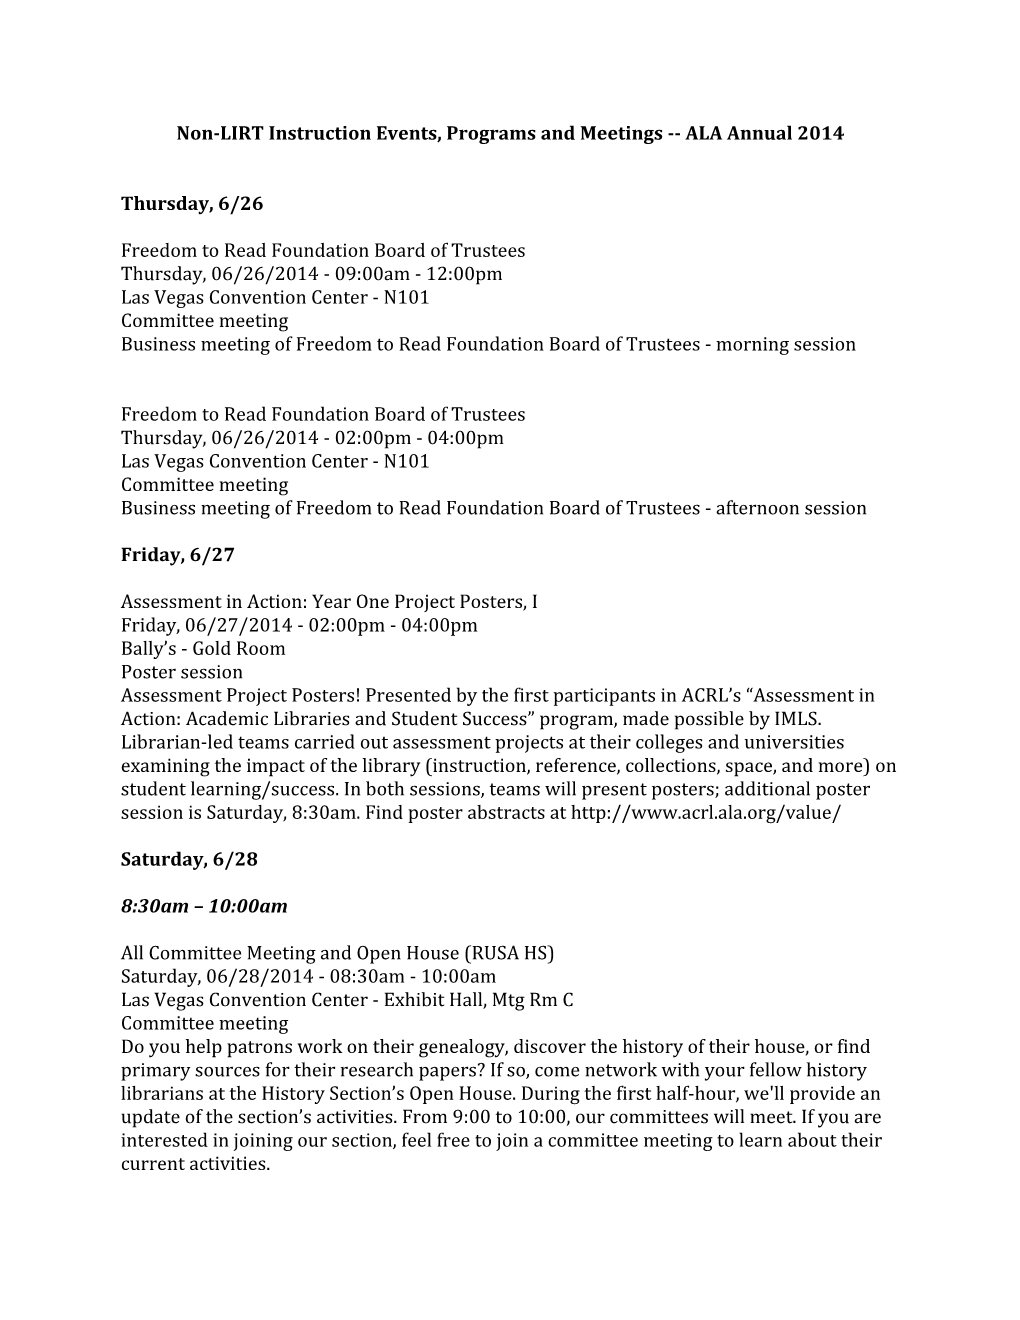 Non-LIRT Instruction Events, Programs and Meetings ALA Annual 2014